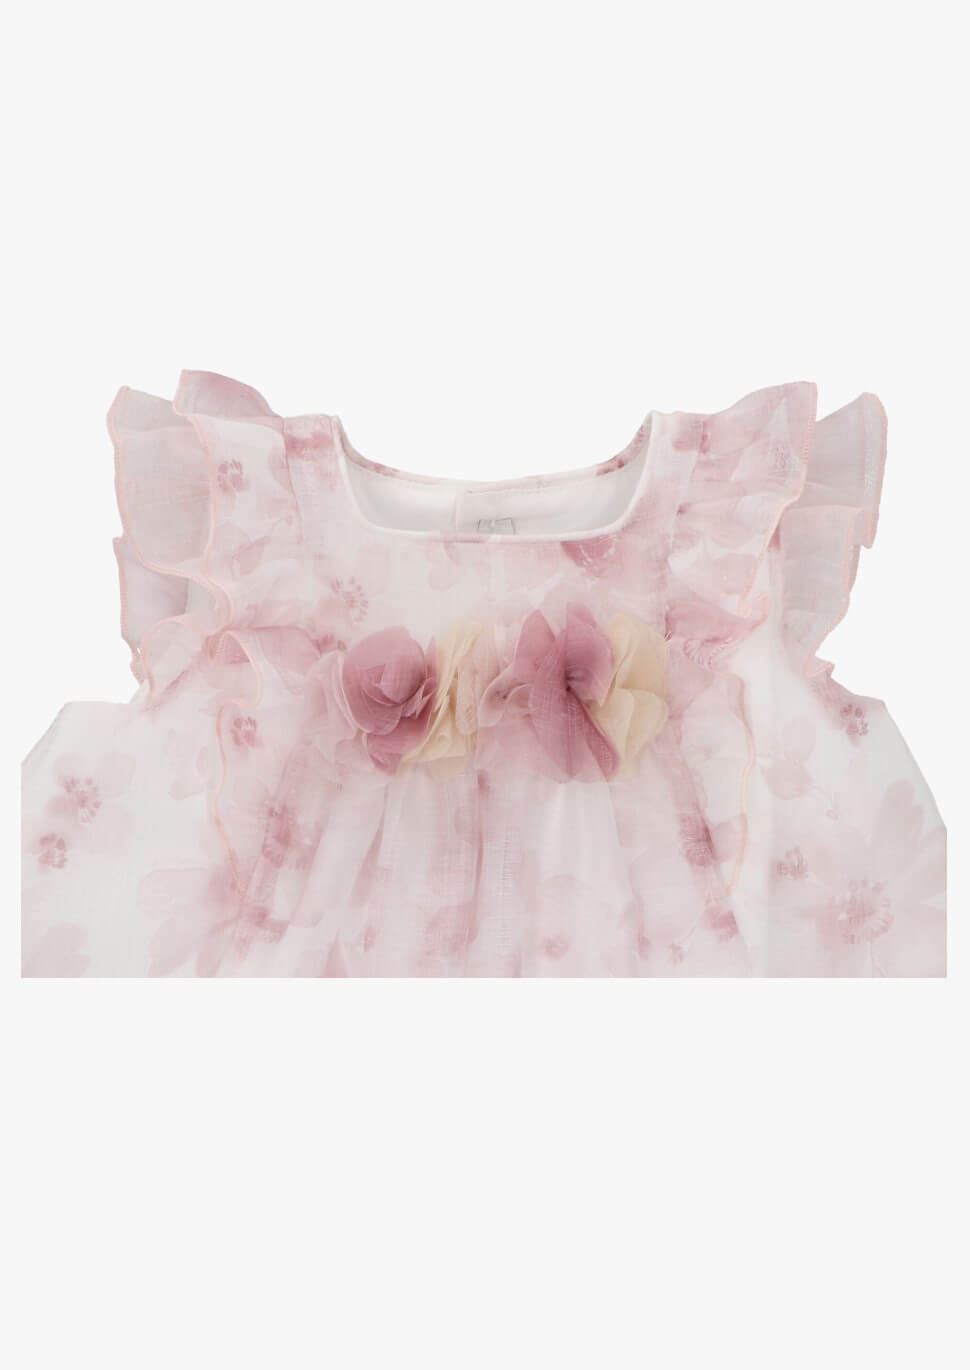 powder pink dress and bloomers set by spanish brand martin aranda from tors childrens wear